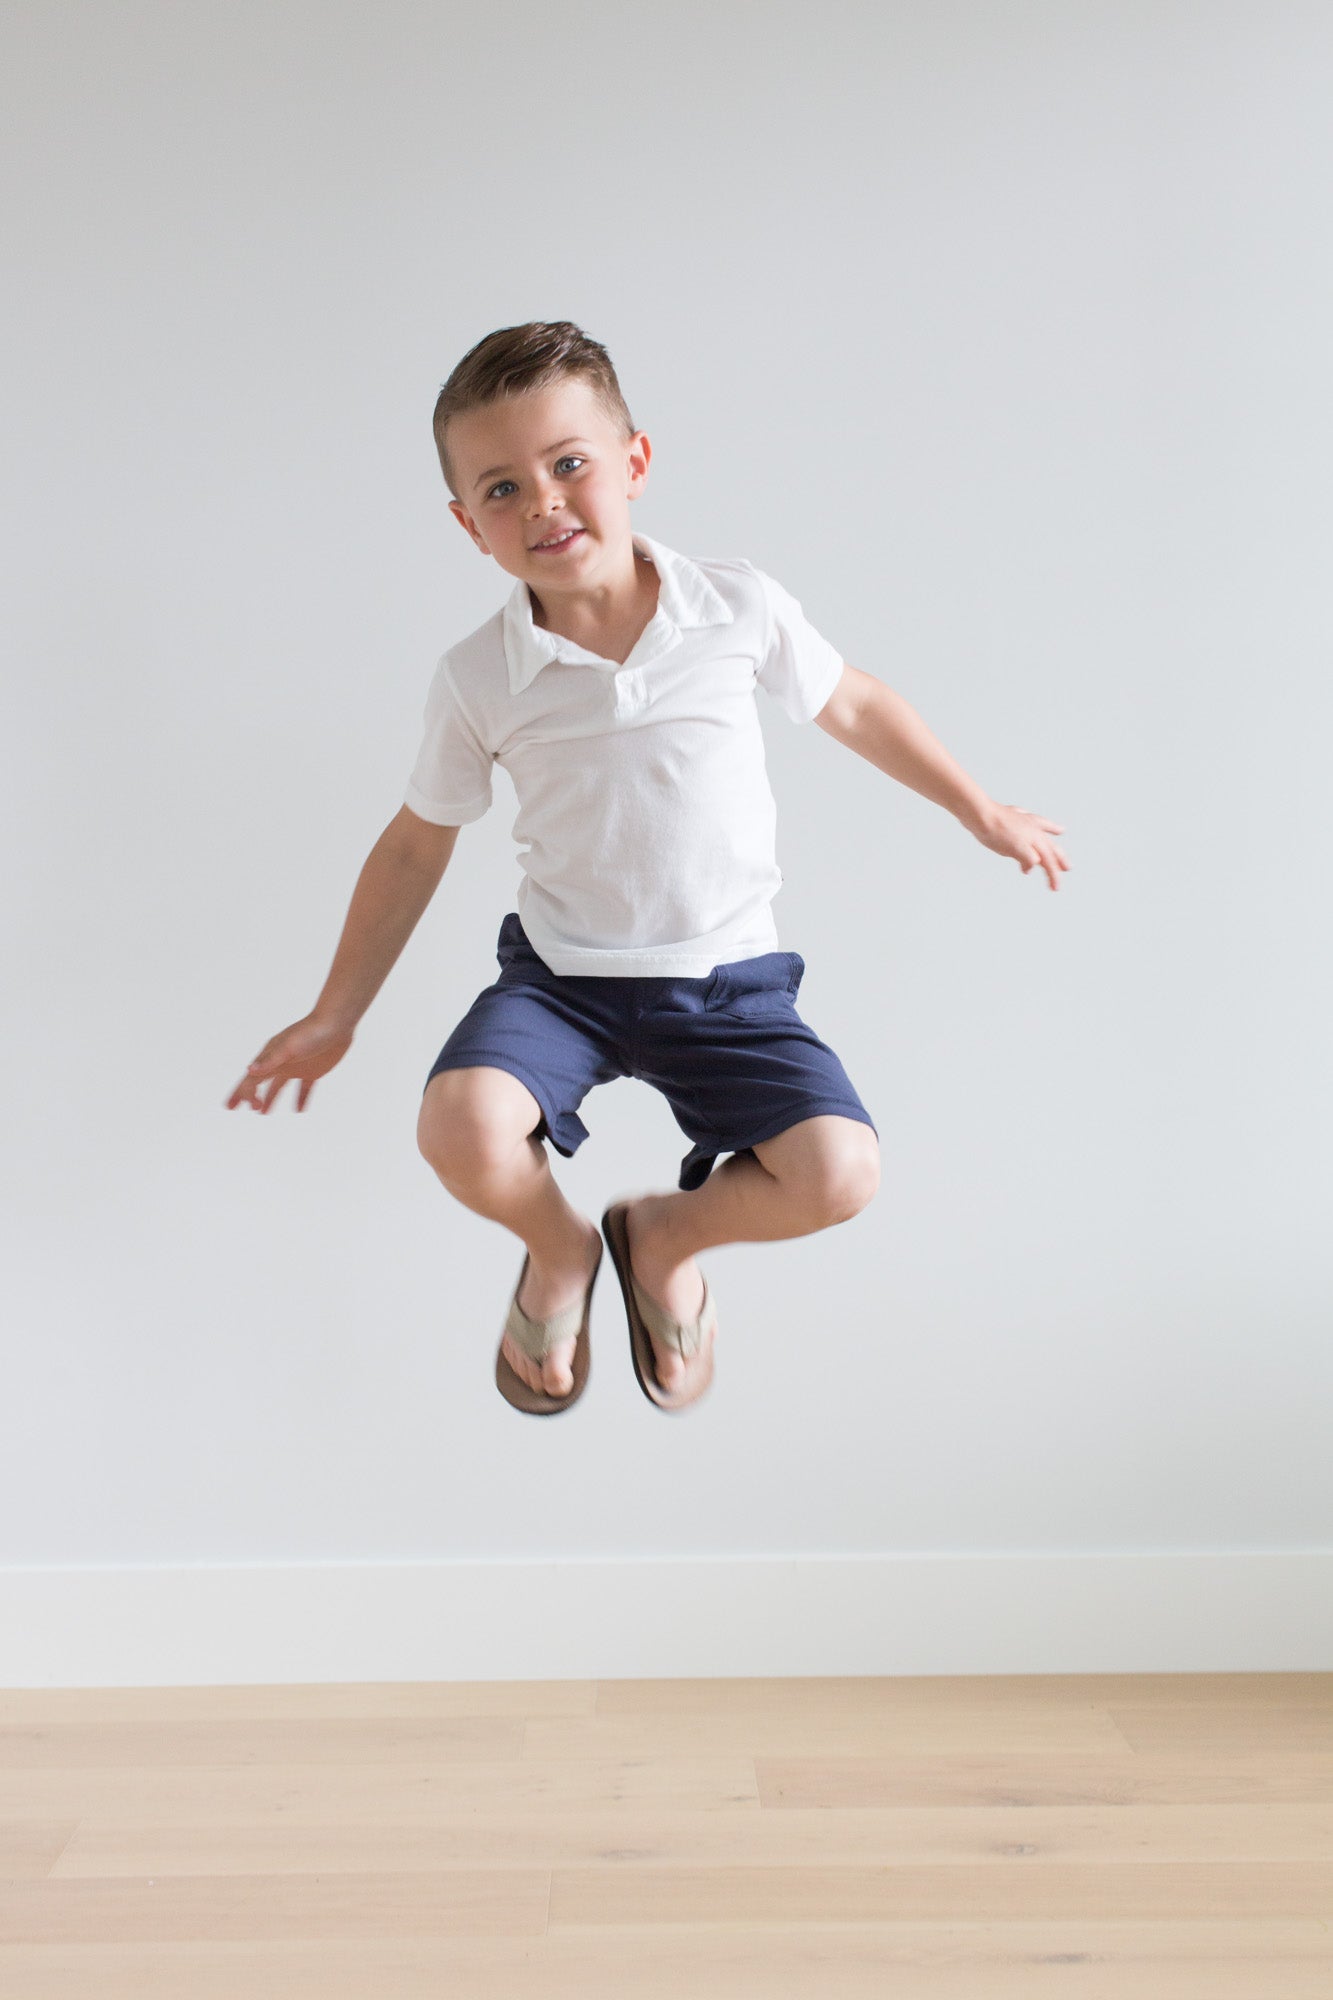 Boy jumping for joy in his comfortable school clothing.